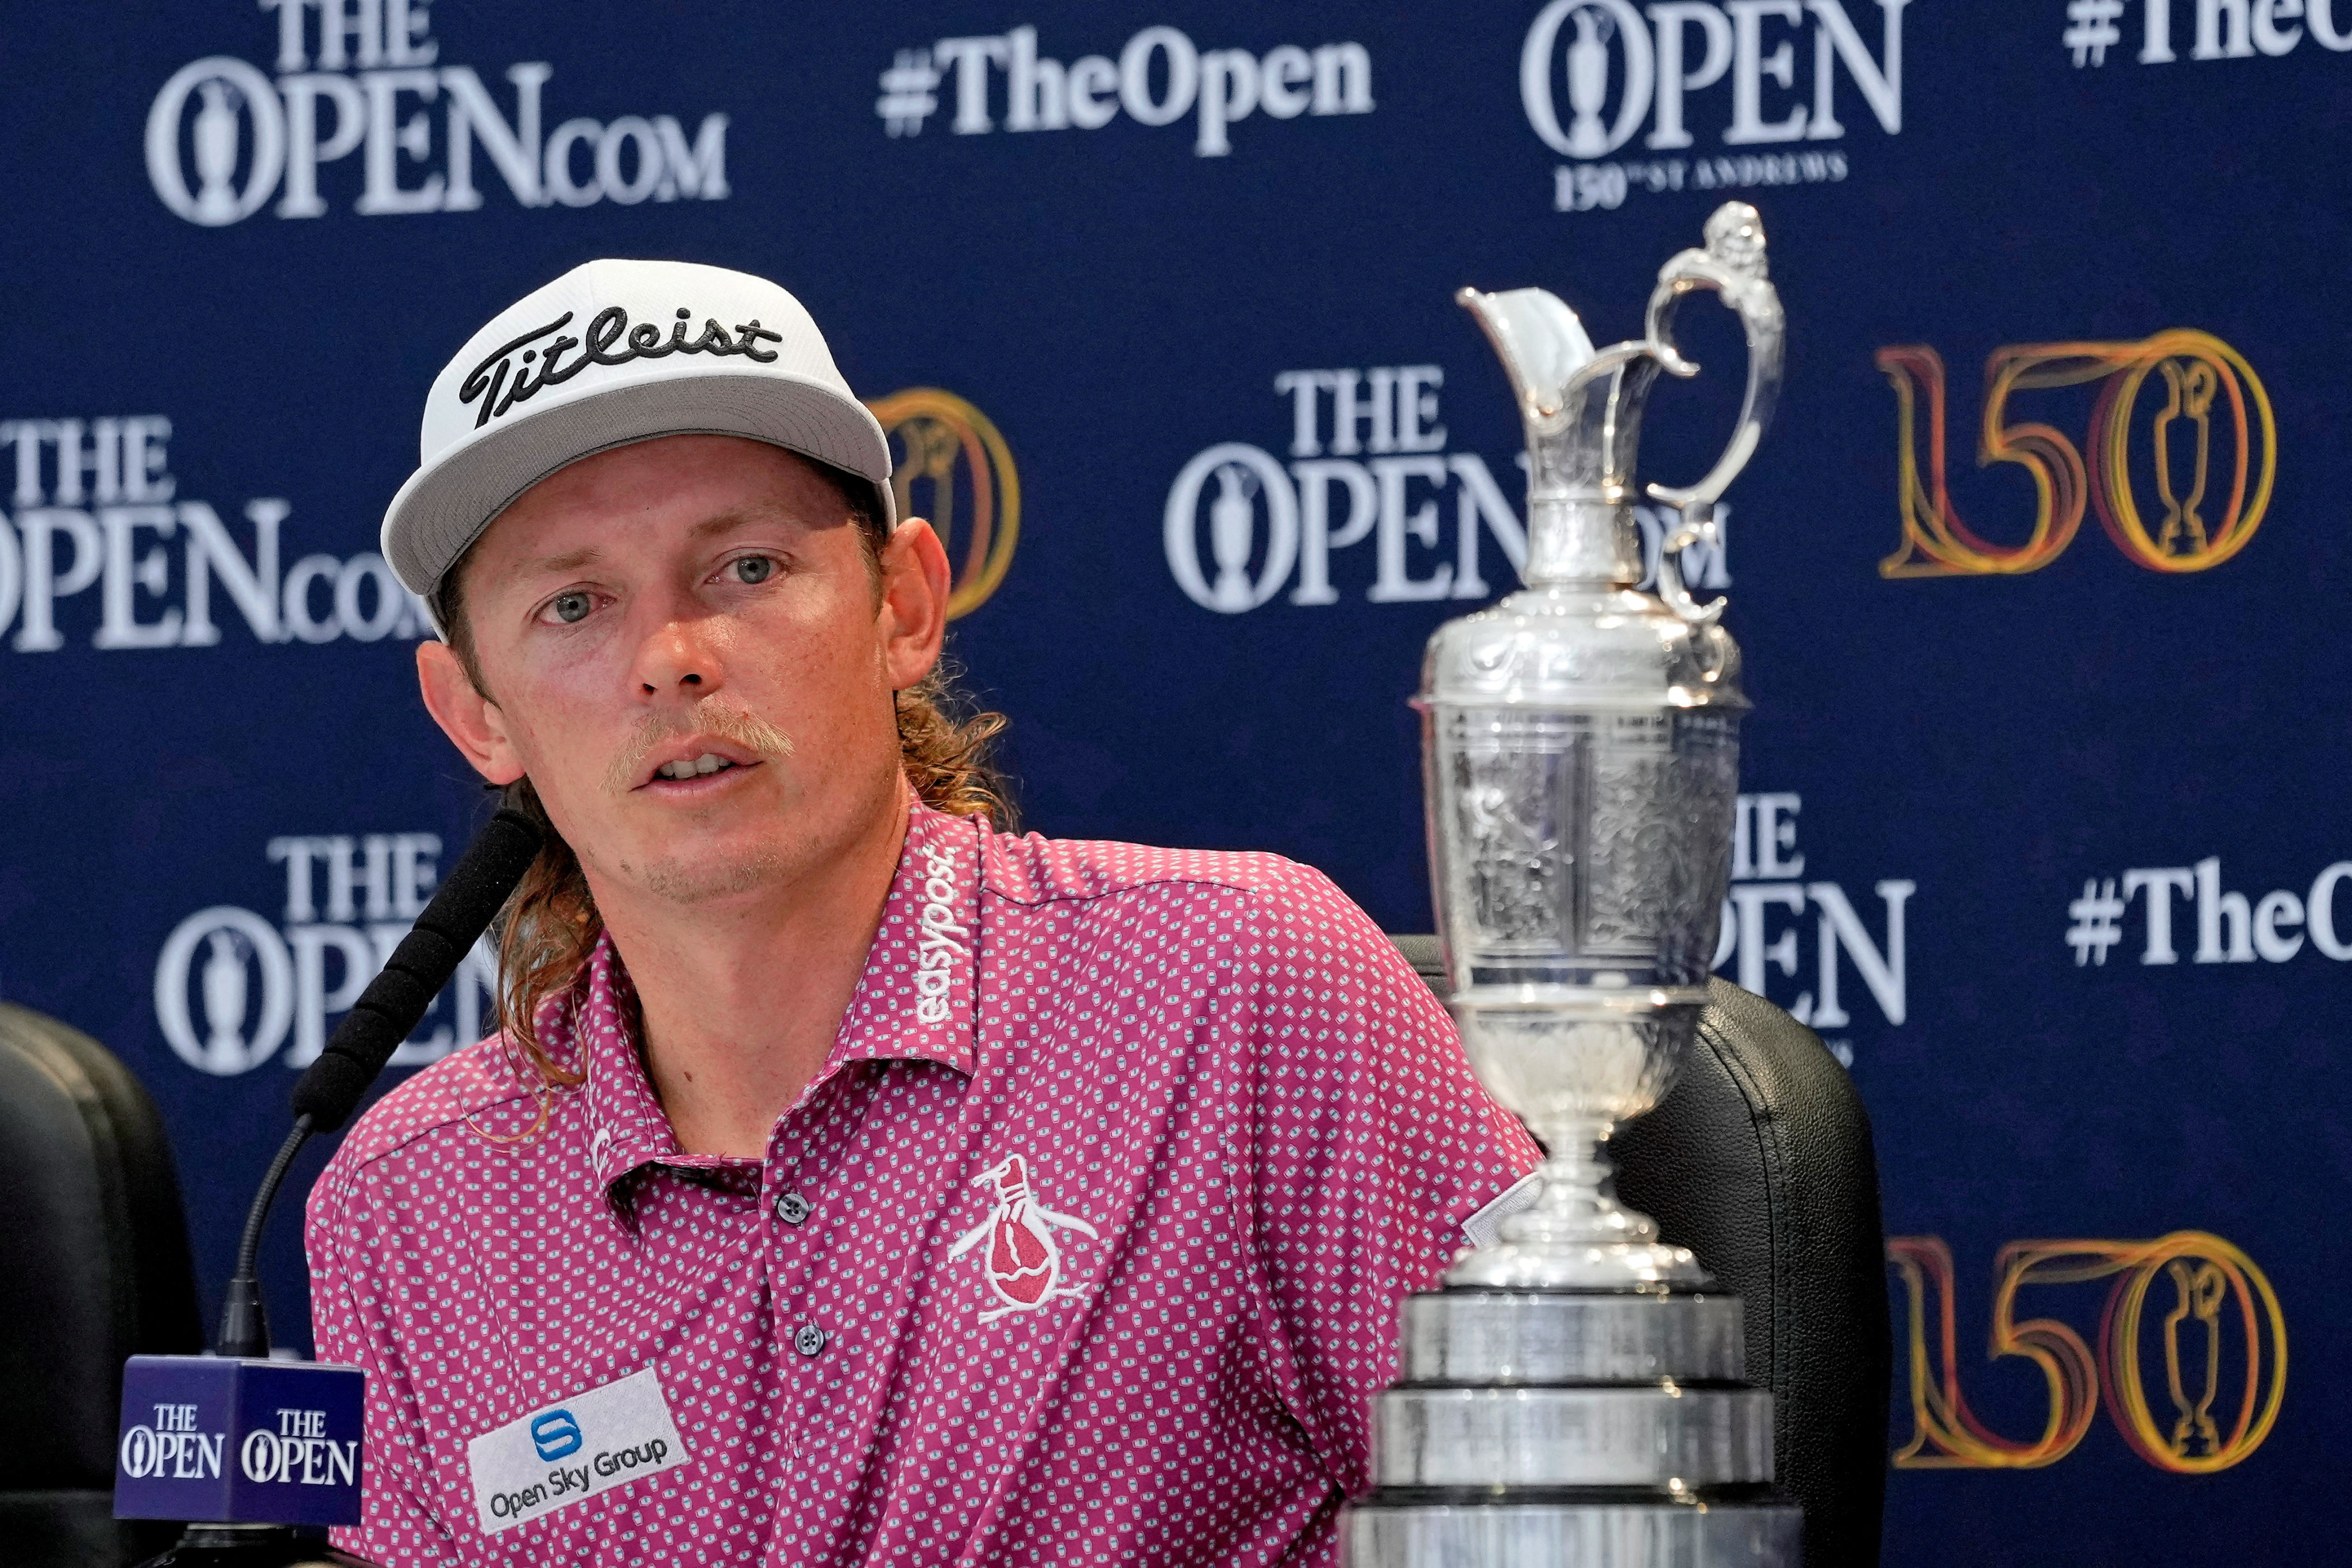 Cameron Smith rebuked reporters for asking about LIV tournament after winning the Open. Photo: USA TODAY Sports